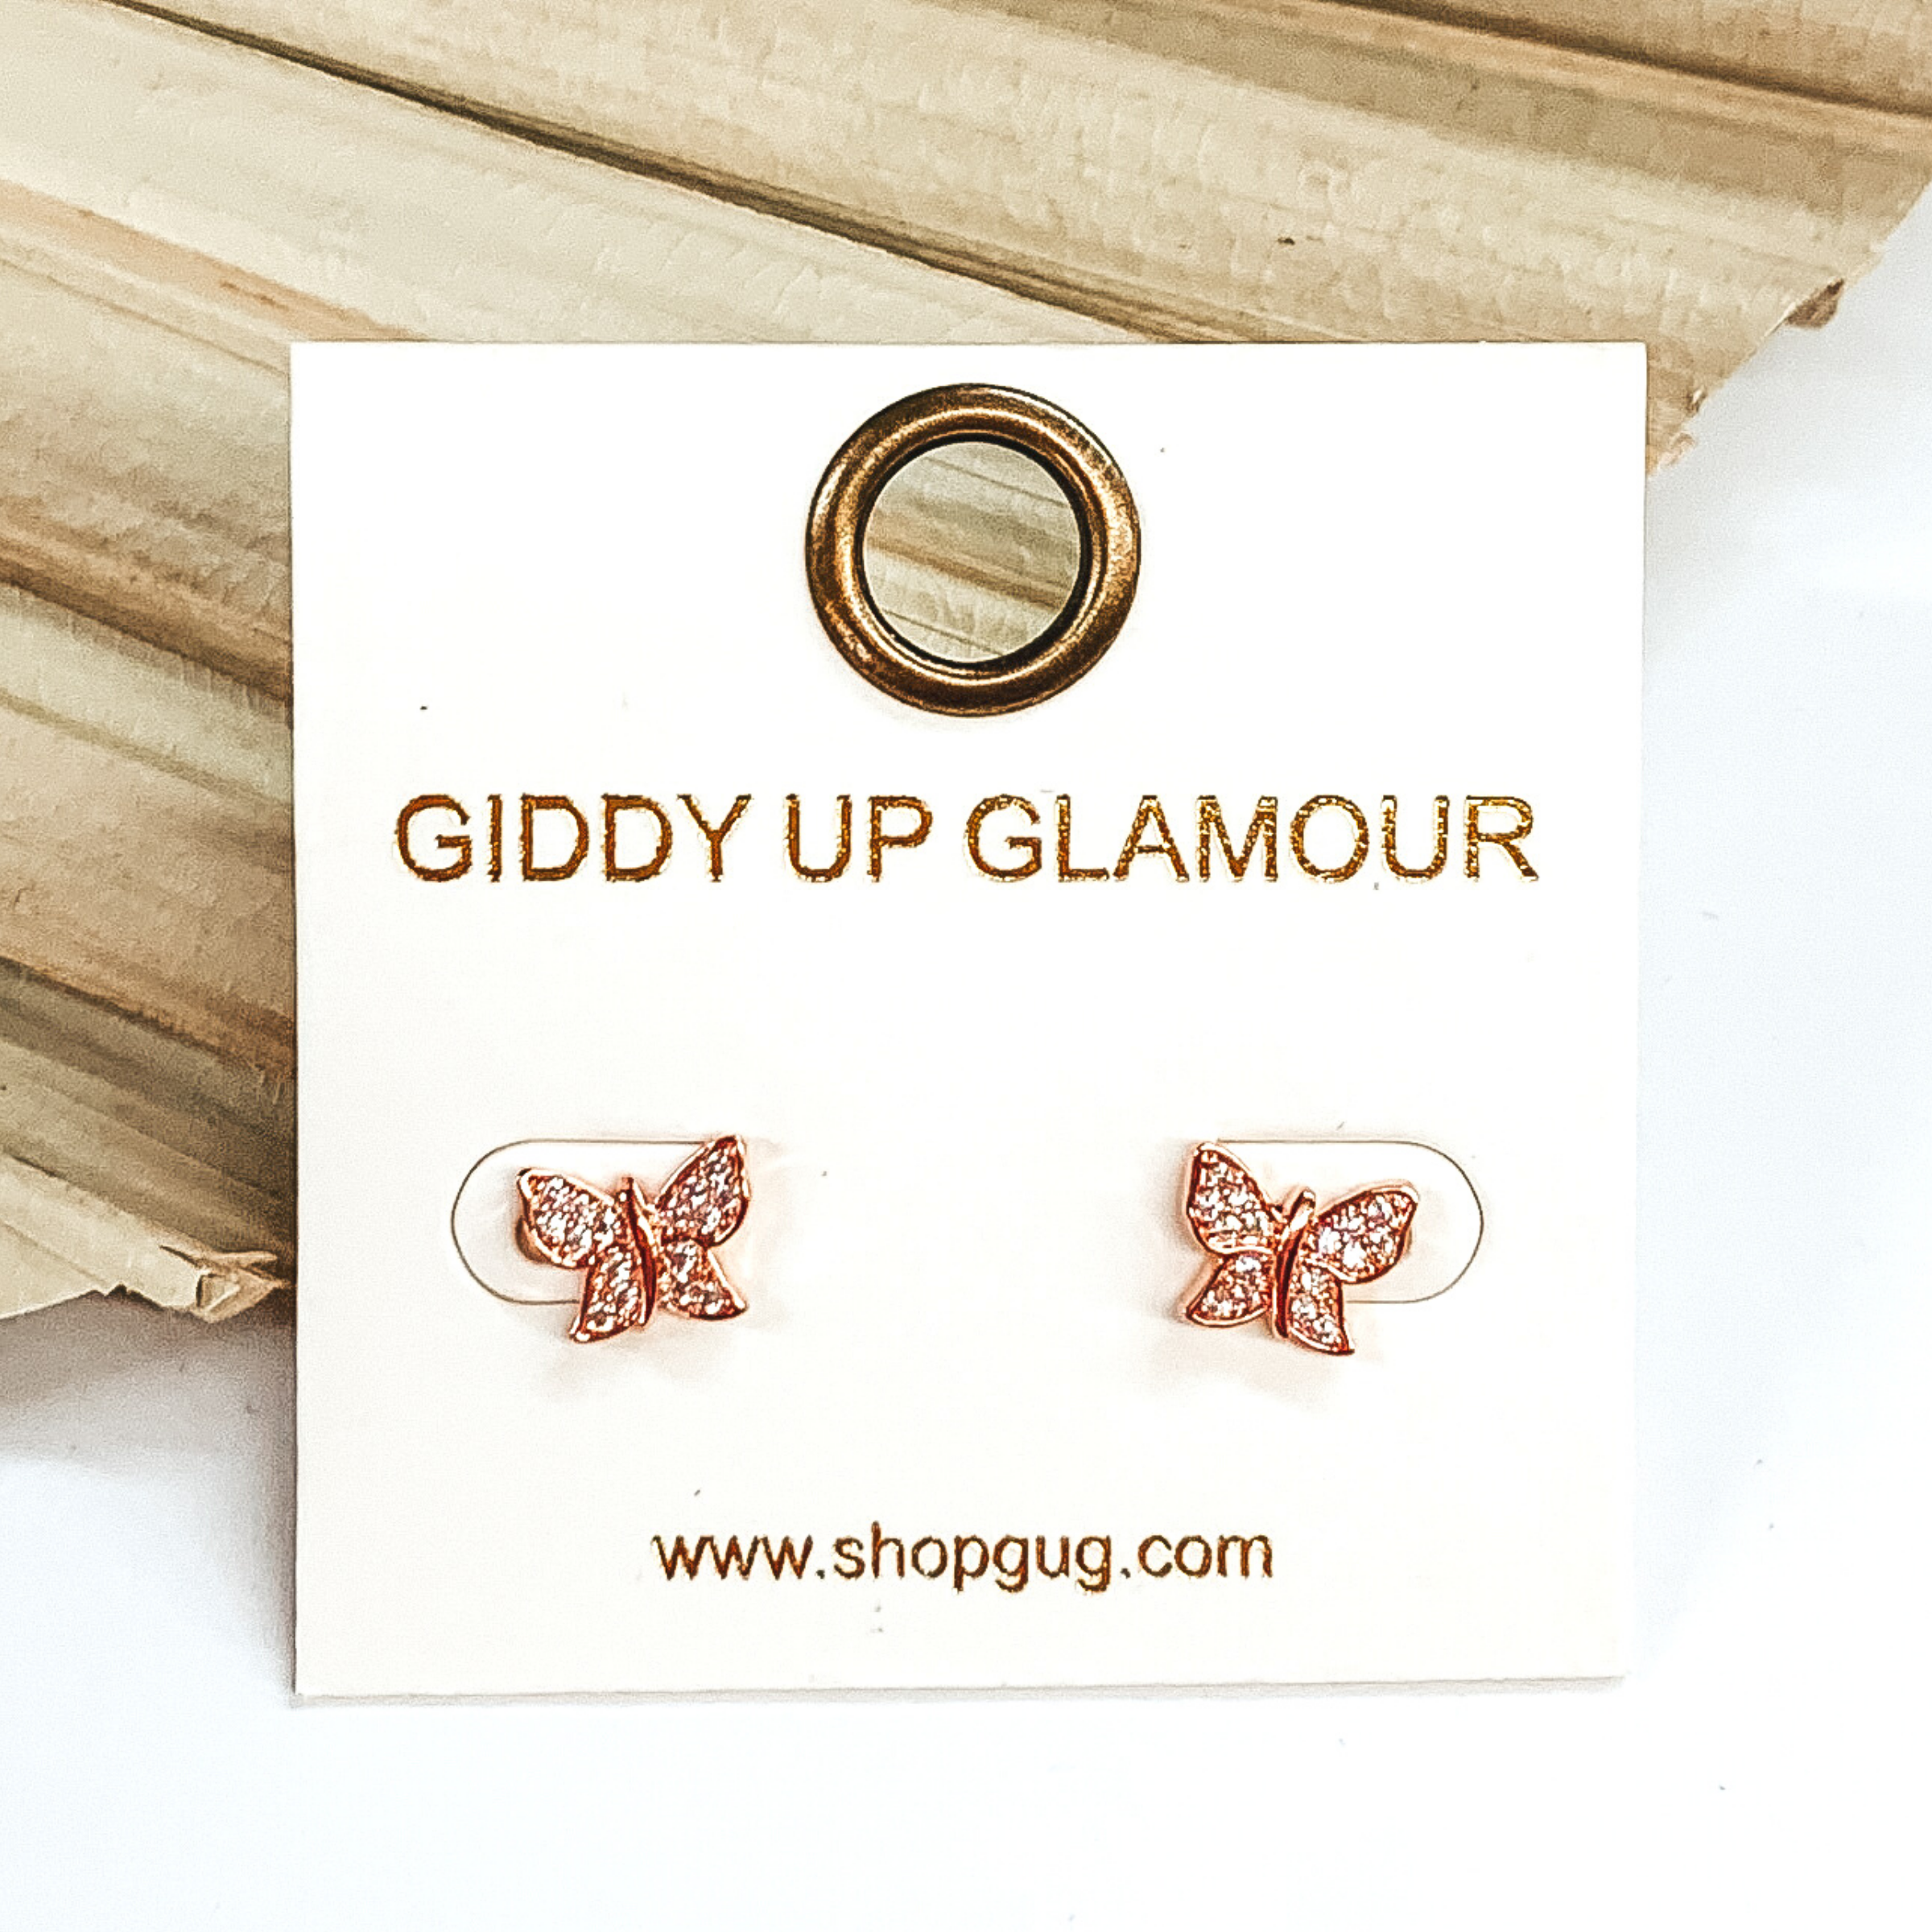 Small, rose gold butterfly stud earrings with clear crystals. These earrings are pictured laying on a green palm leaf on a white background.